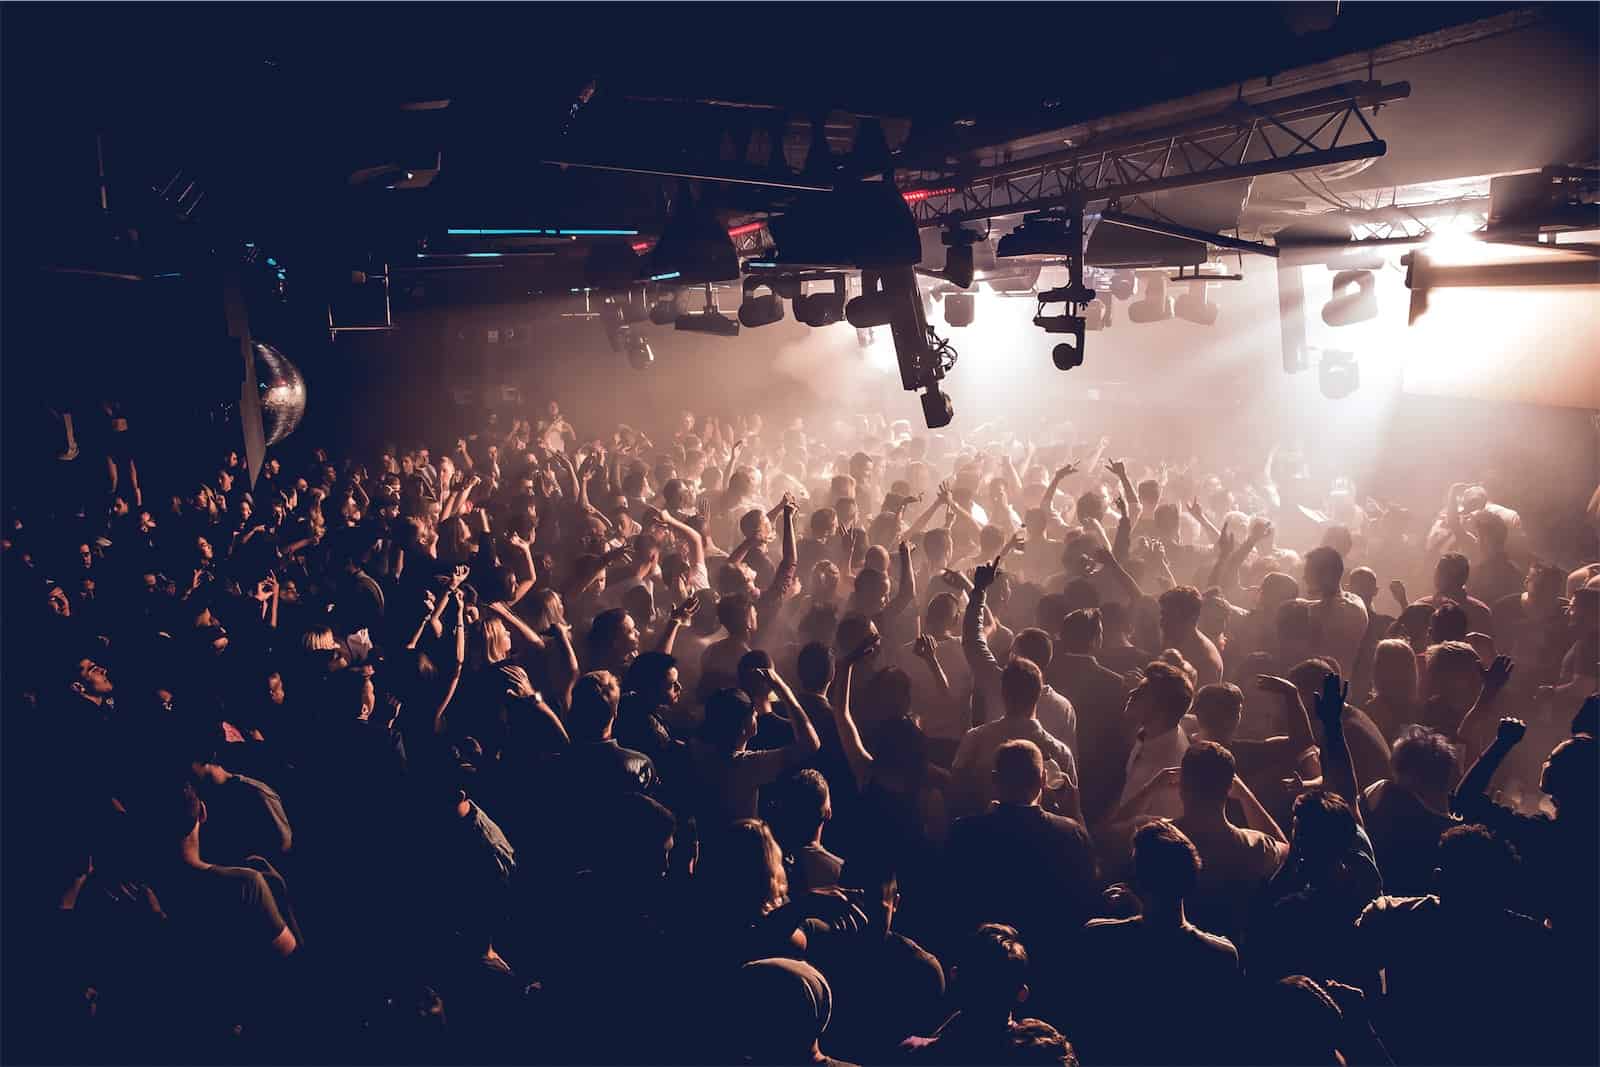 81% of UK nightclubs will not survive past February without government support